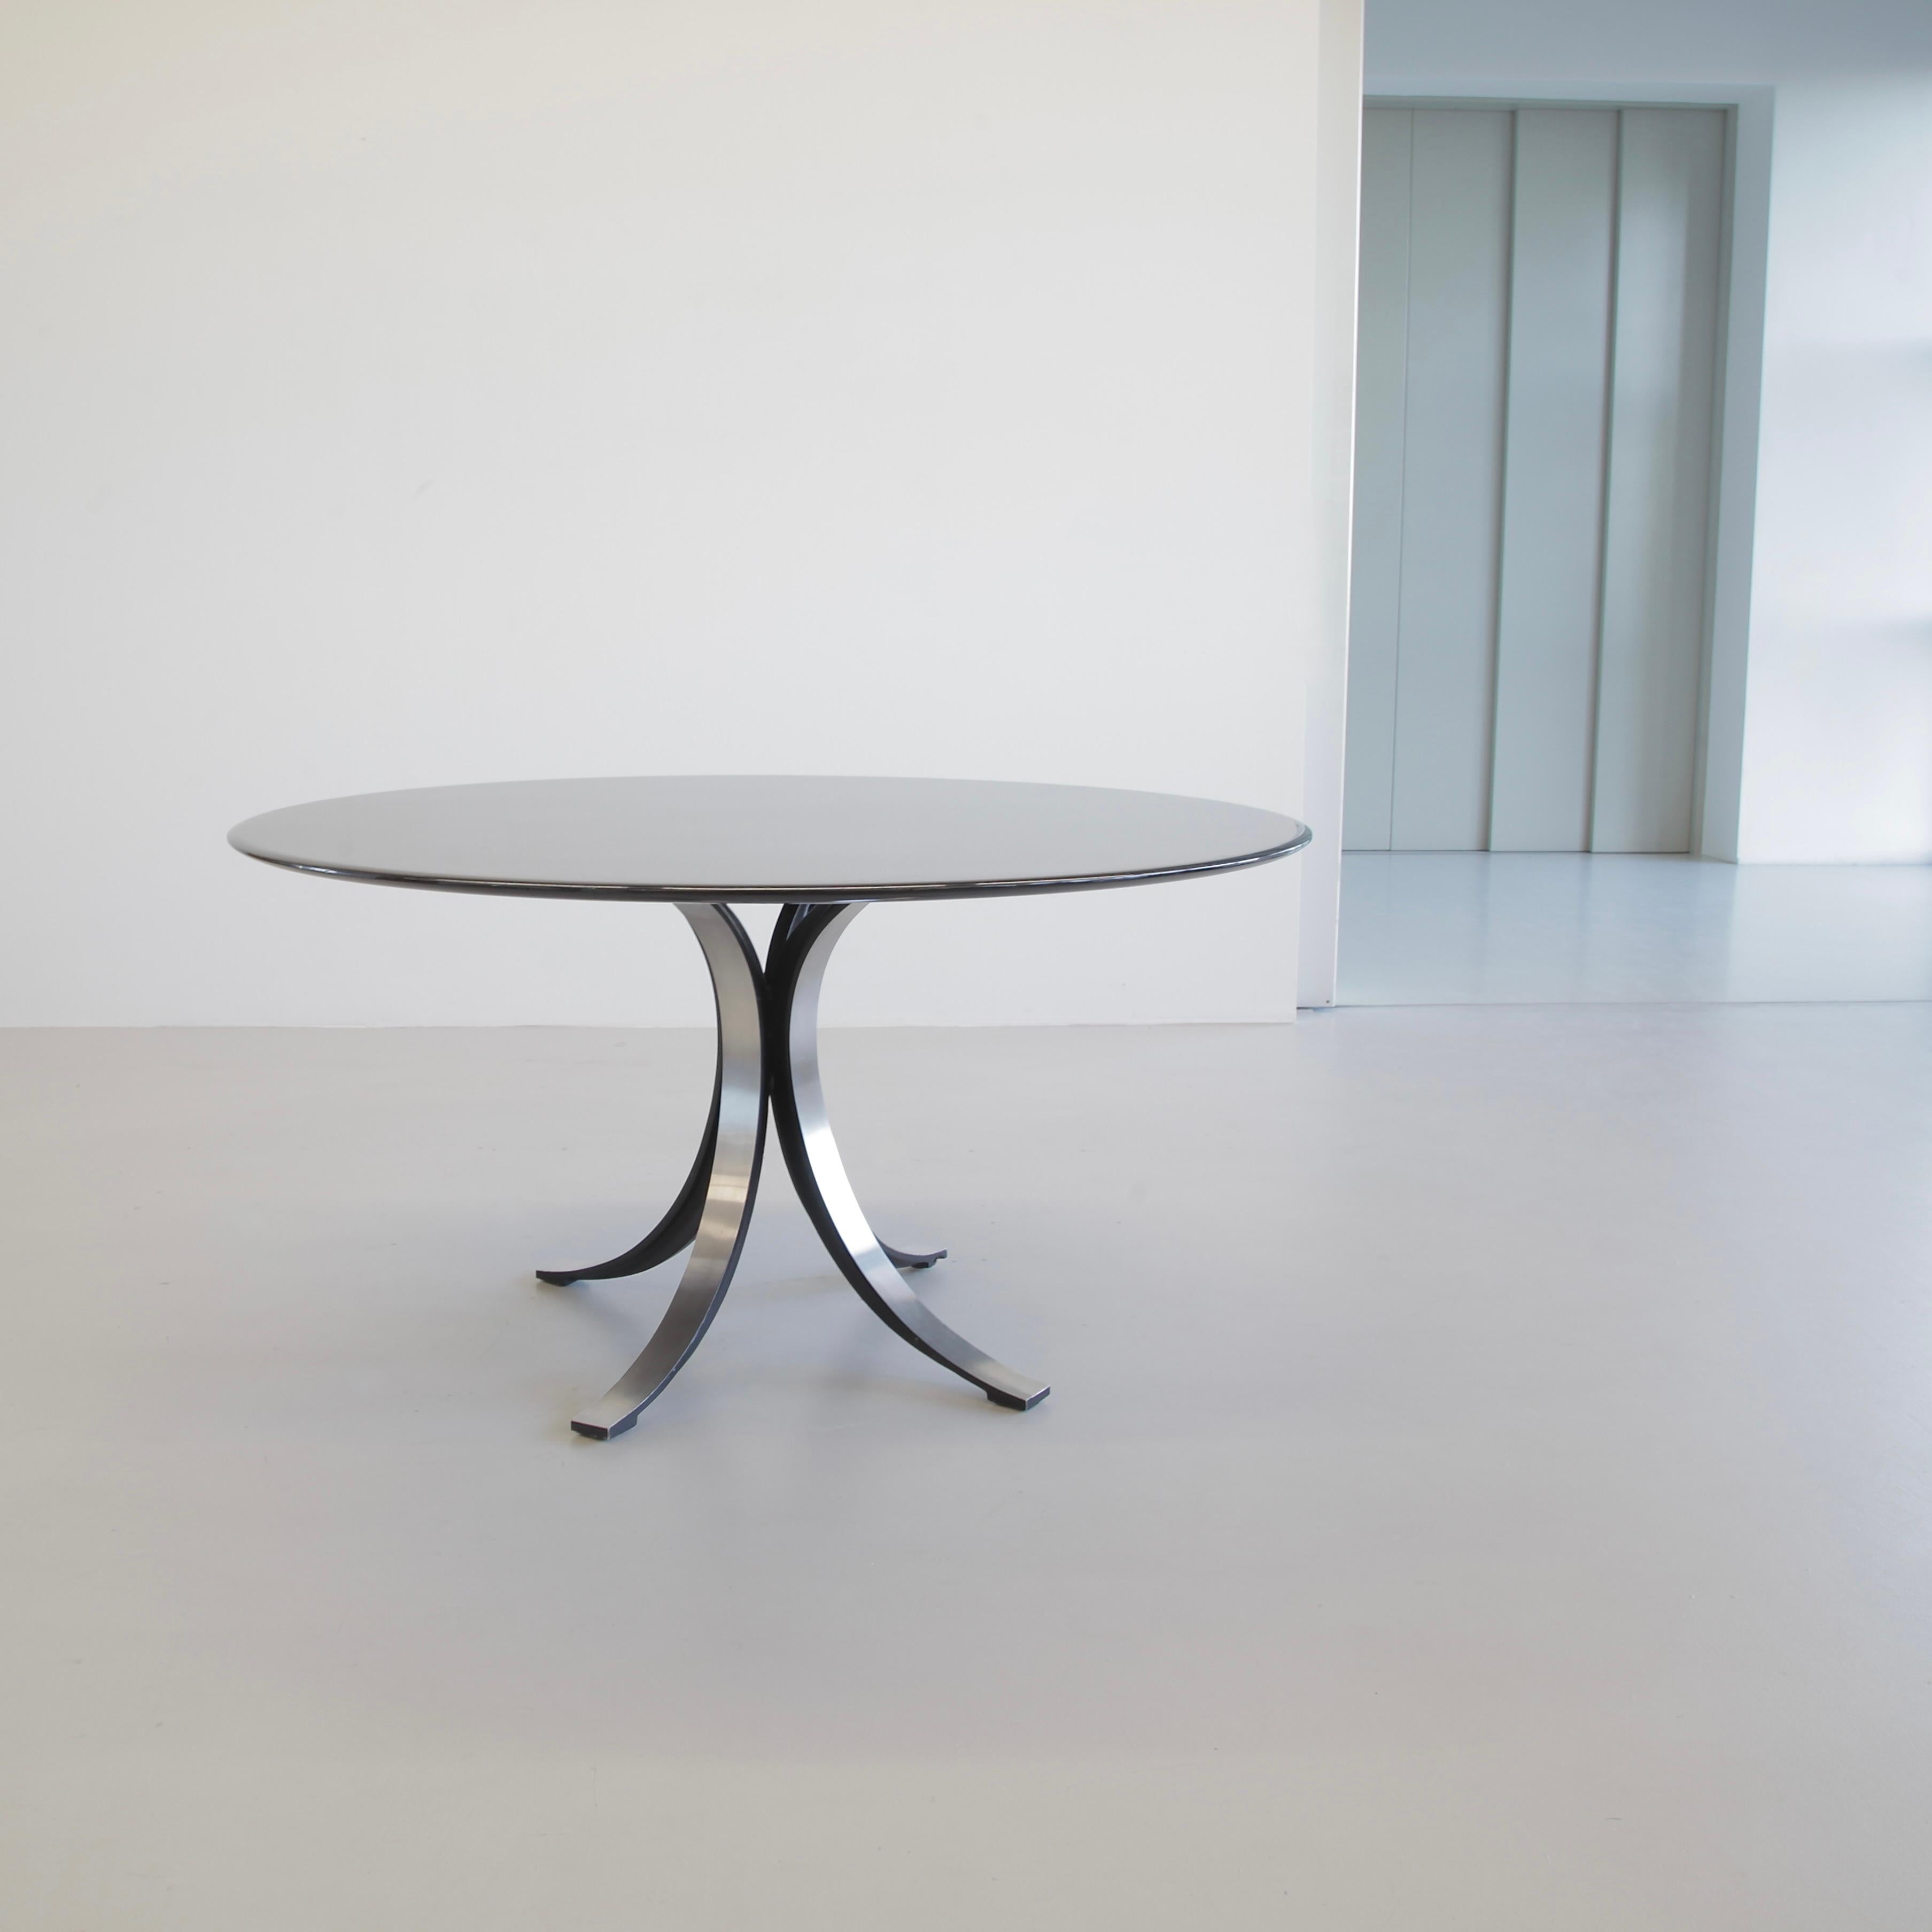 Round dining table (T69A), designed by Osvaldo Borsani and Eugenio Gerli in 1963/64. Produced by TECNO.

Brushed metal base with the inner sides finished in matt black enamel. Original black lacquered wooden round table top. TECNO label on